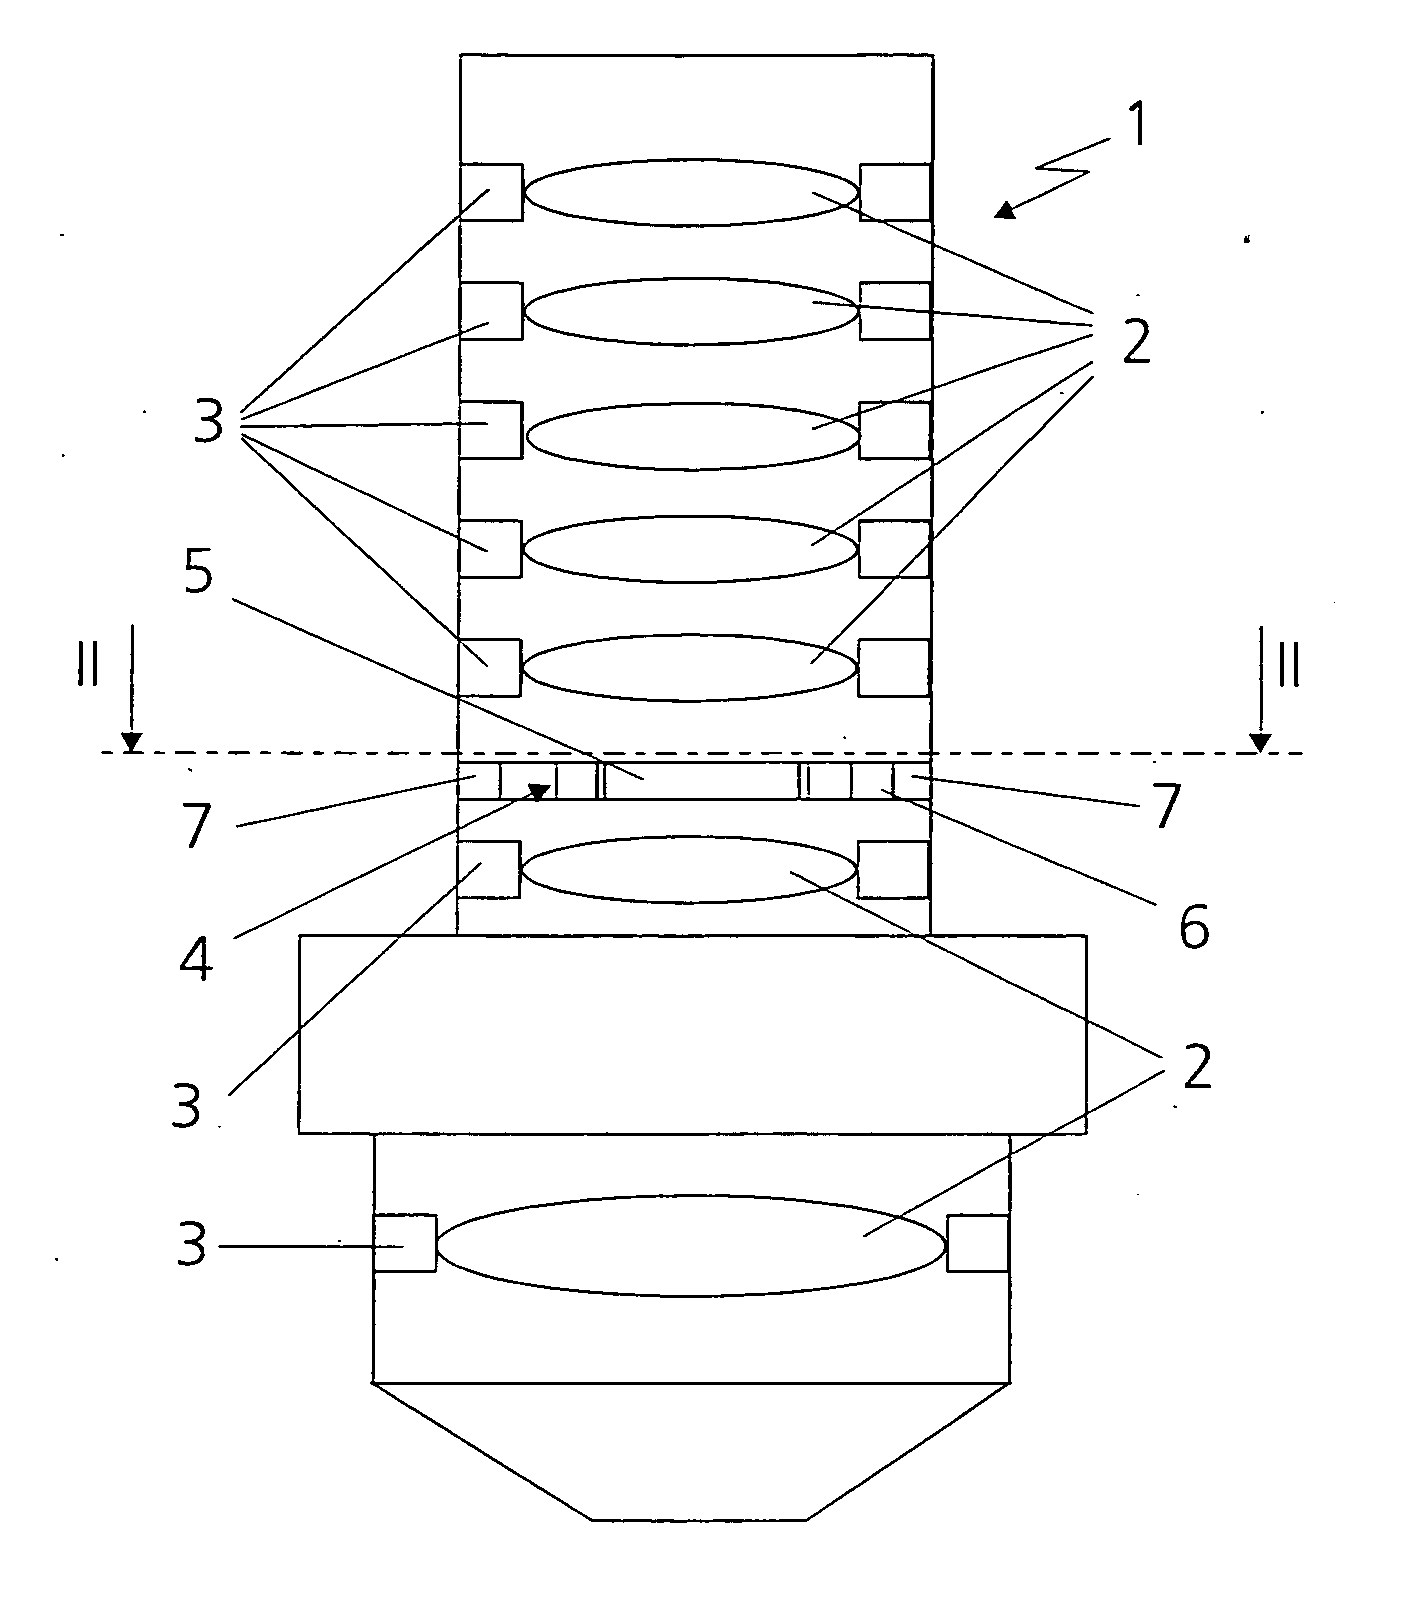 Replacement apparatus for an optical element